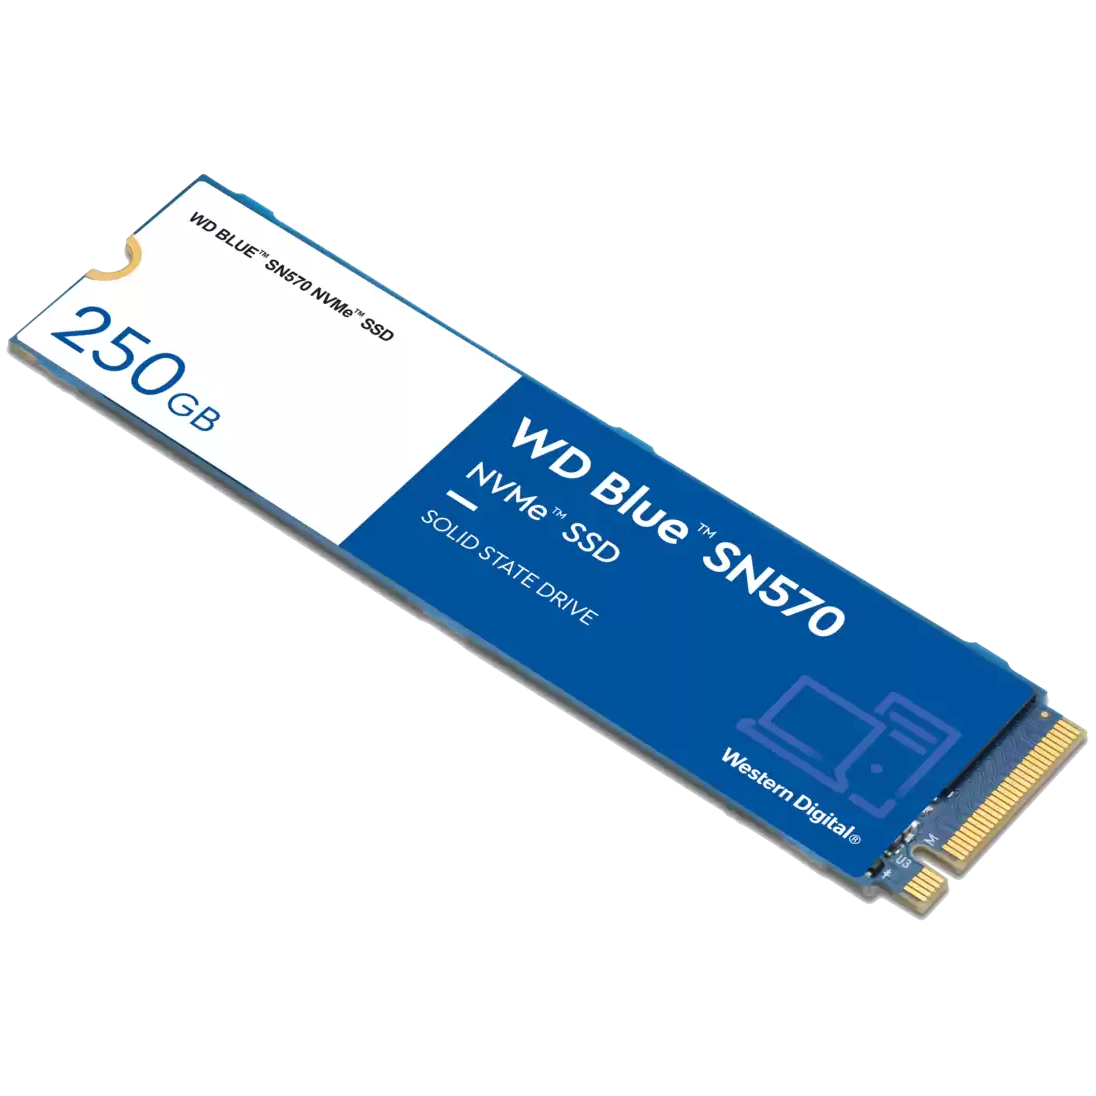 Best SSDs in 2024